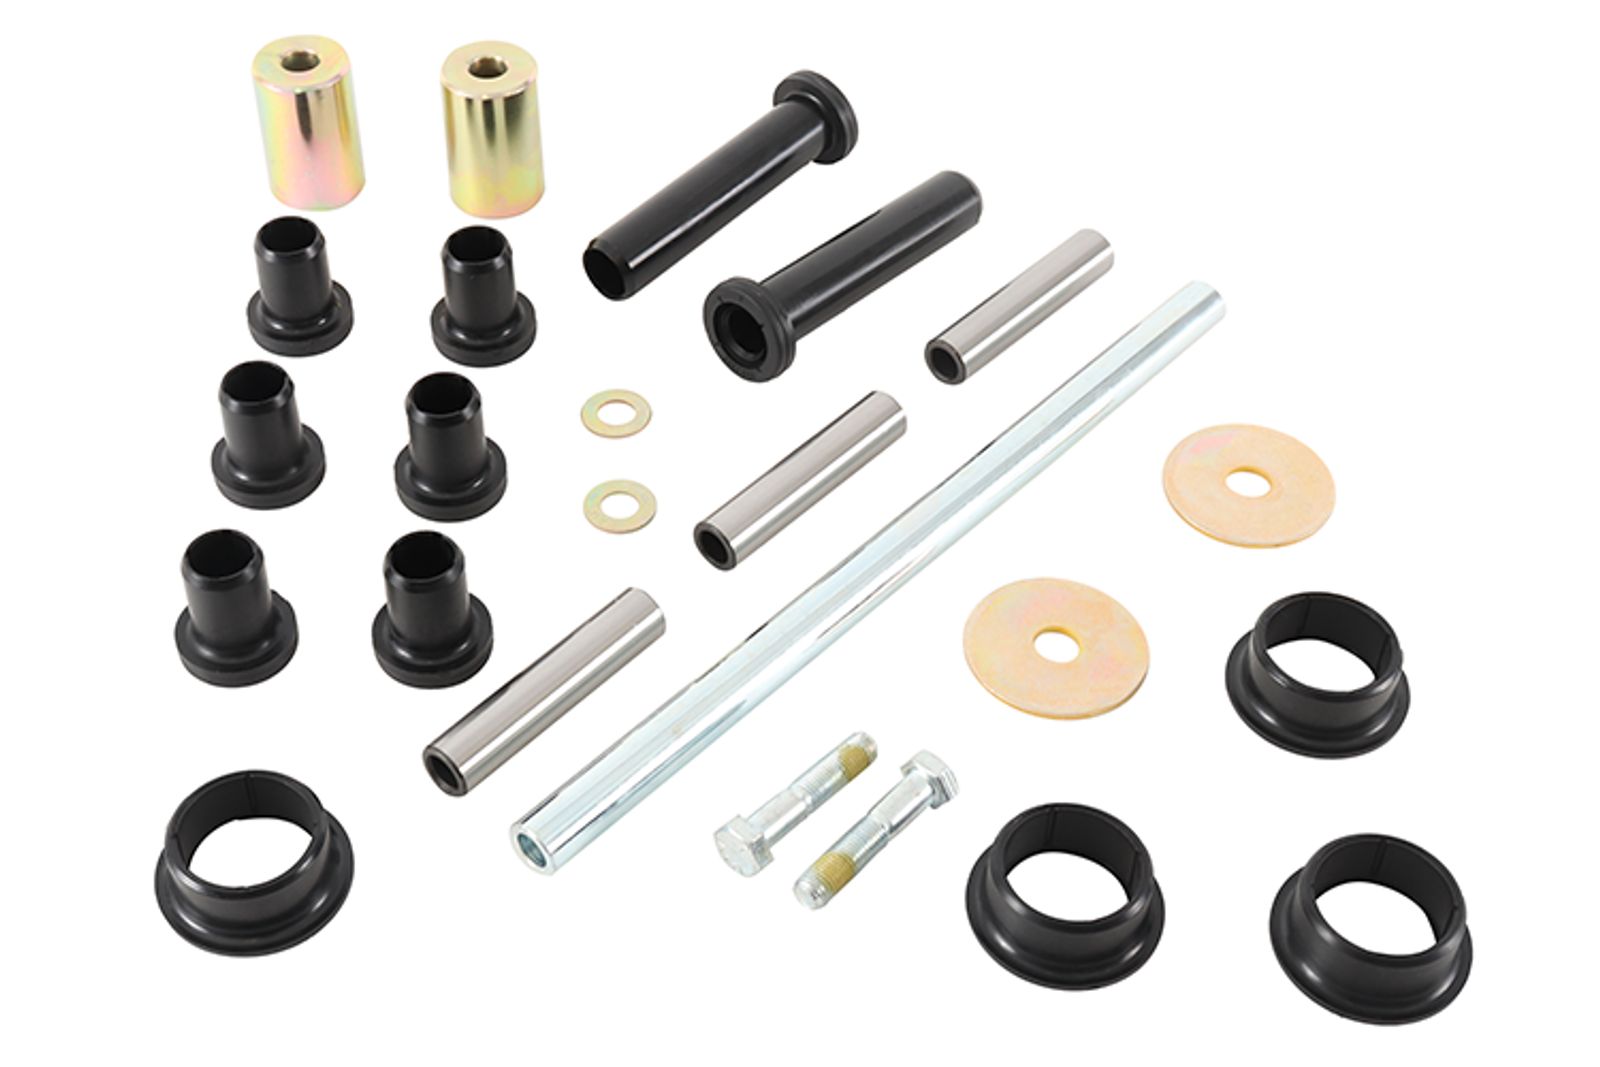 Wrp Rear Ind. Suspension Kits - WRP501167 image